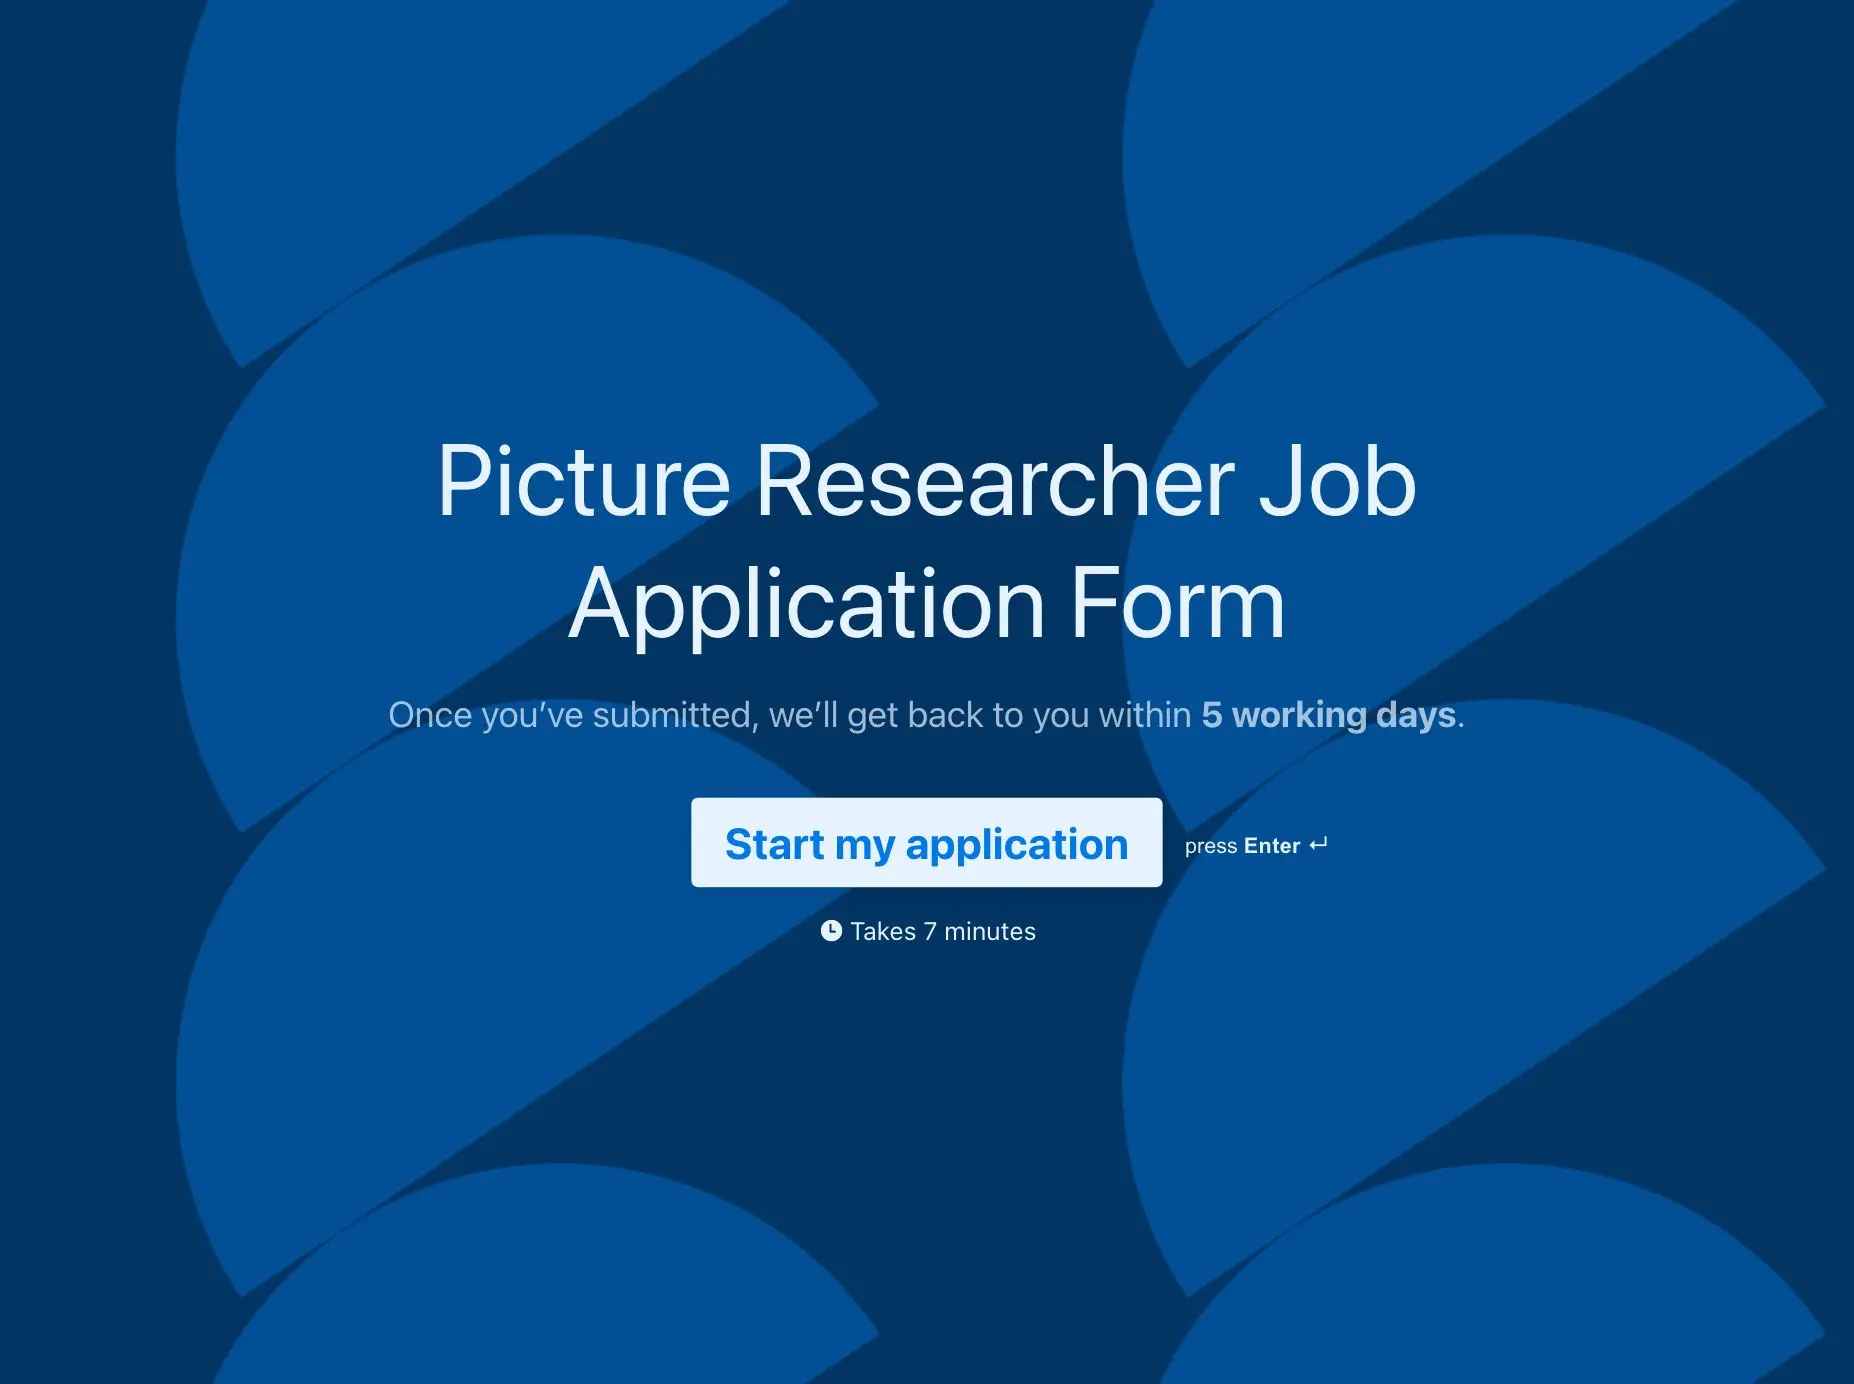 Picture Researcher Job Application Form Template Hero